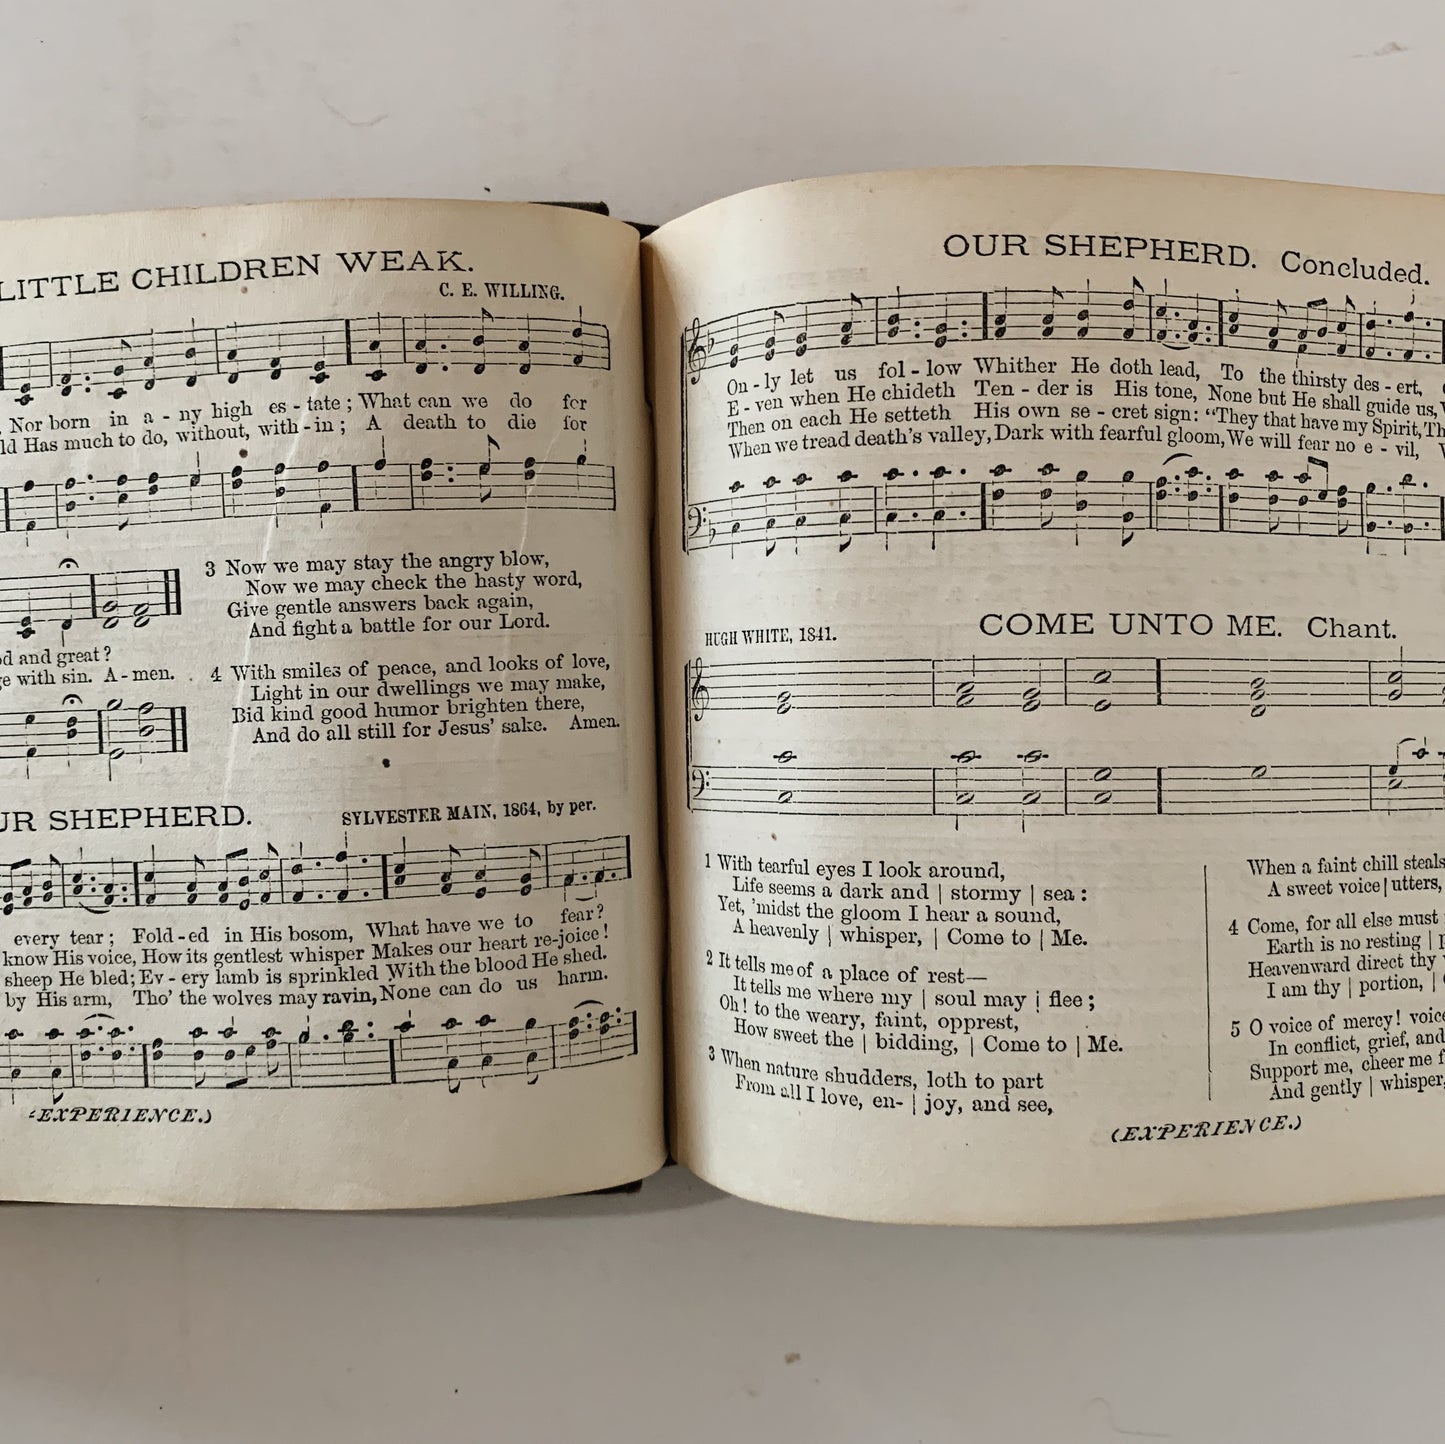 Book of Praise for the Sunday School, Hymns and Tunes For the Prayer Meeting and Home Circle, 1876